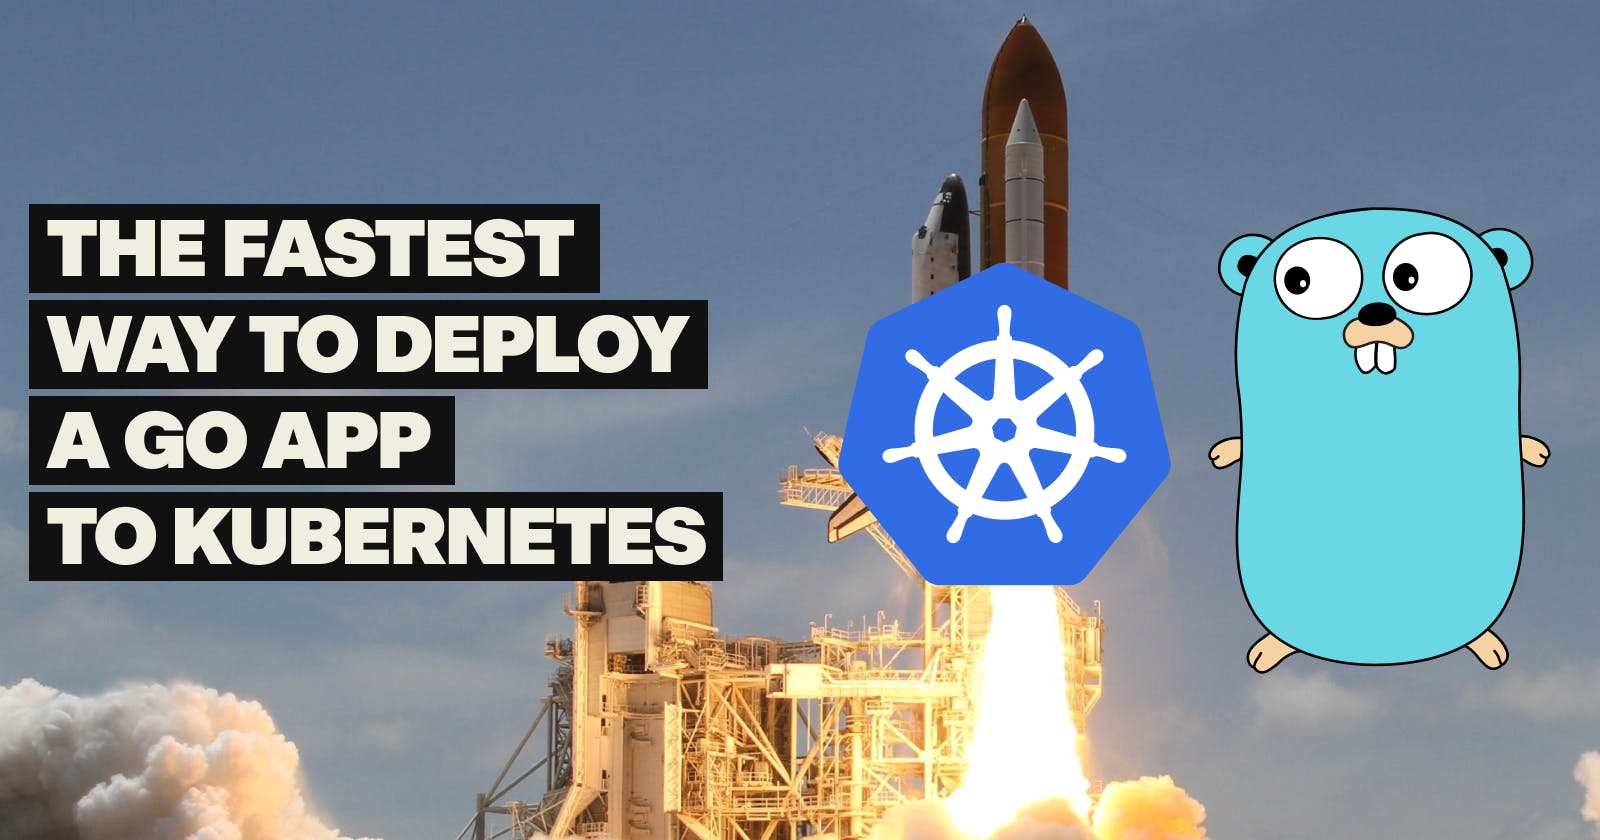 The fastest way to deploy a Go app to Kubernetes